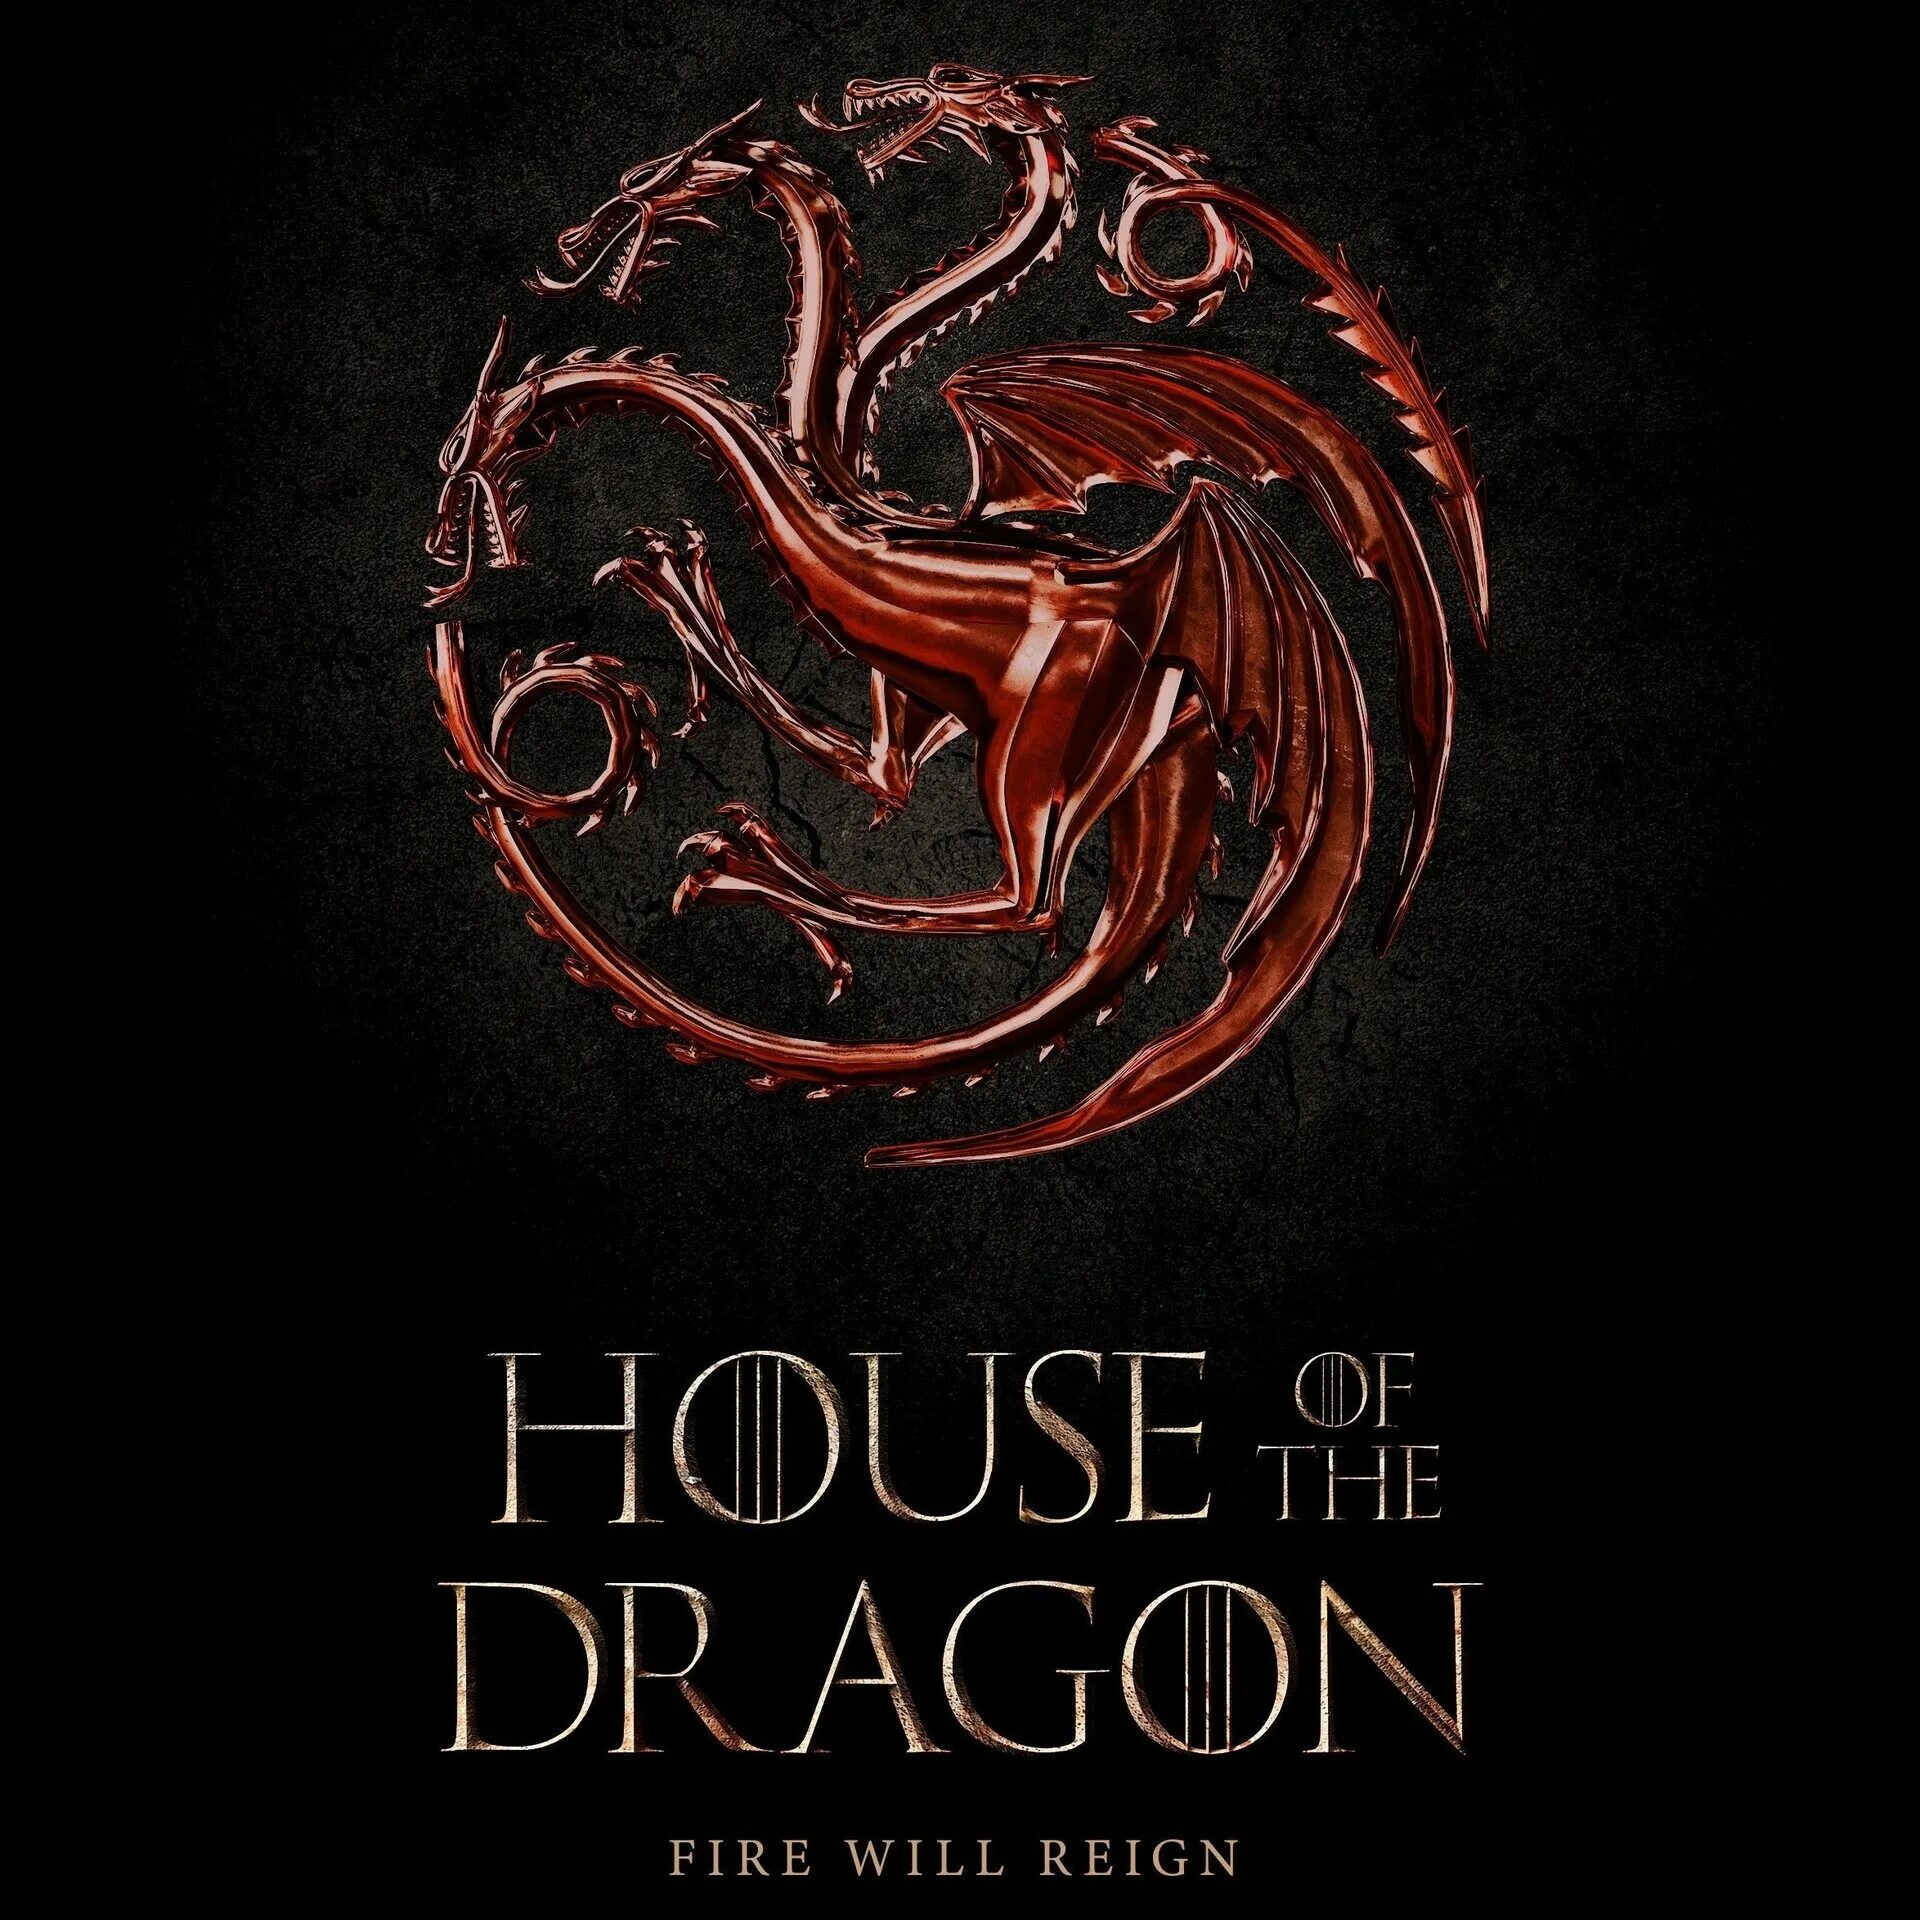 House of the dragon x reader